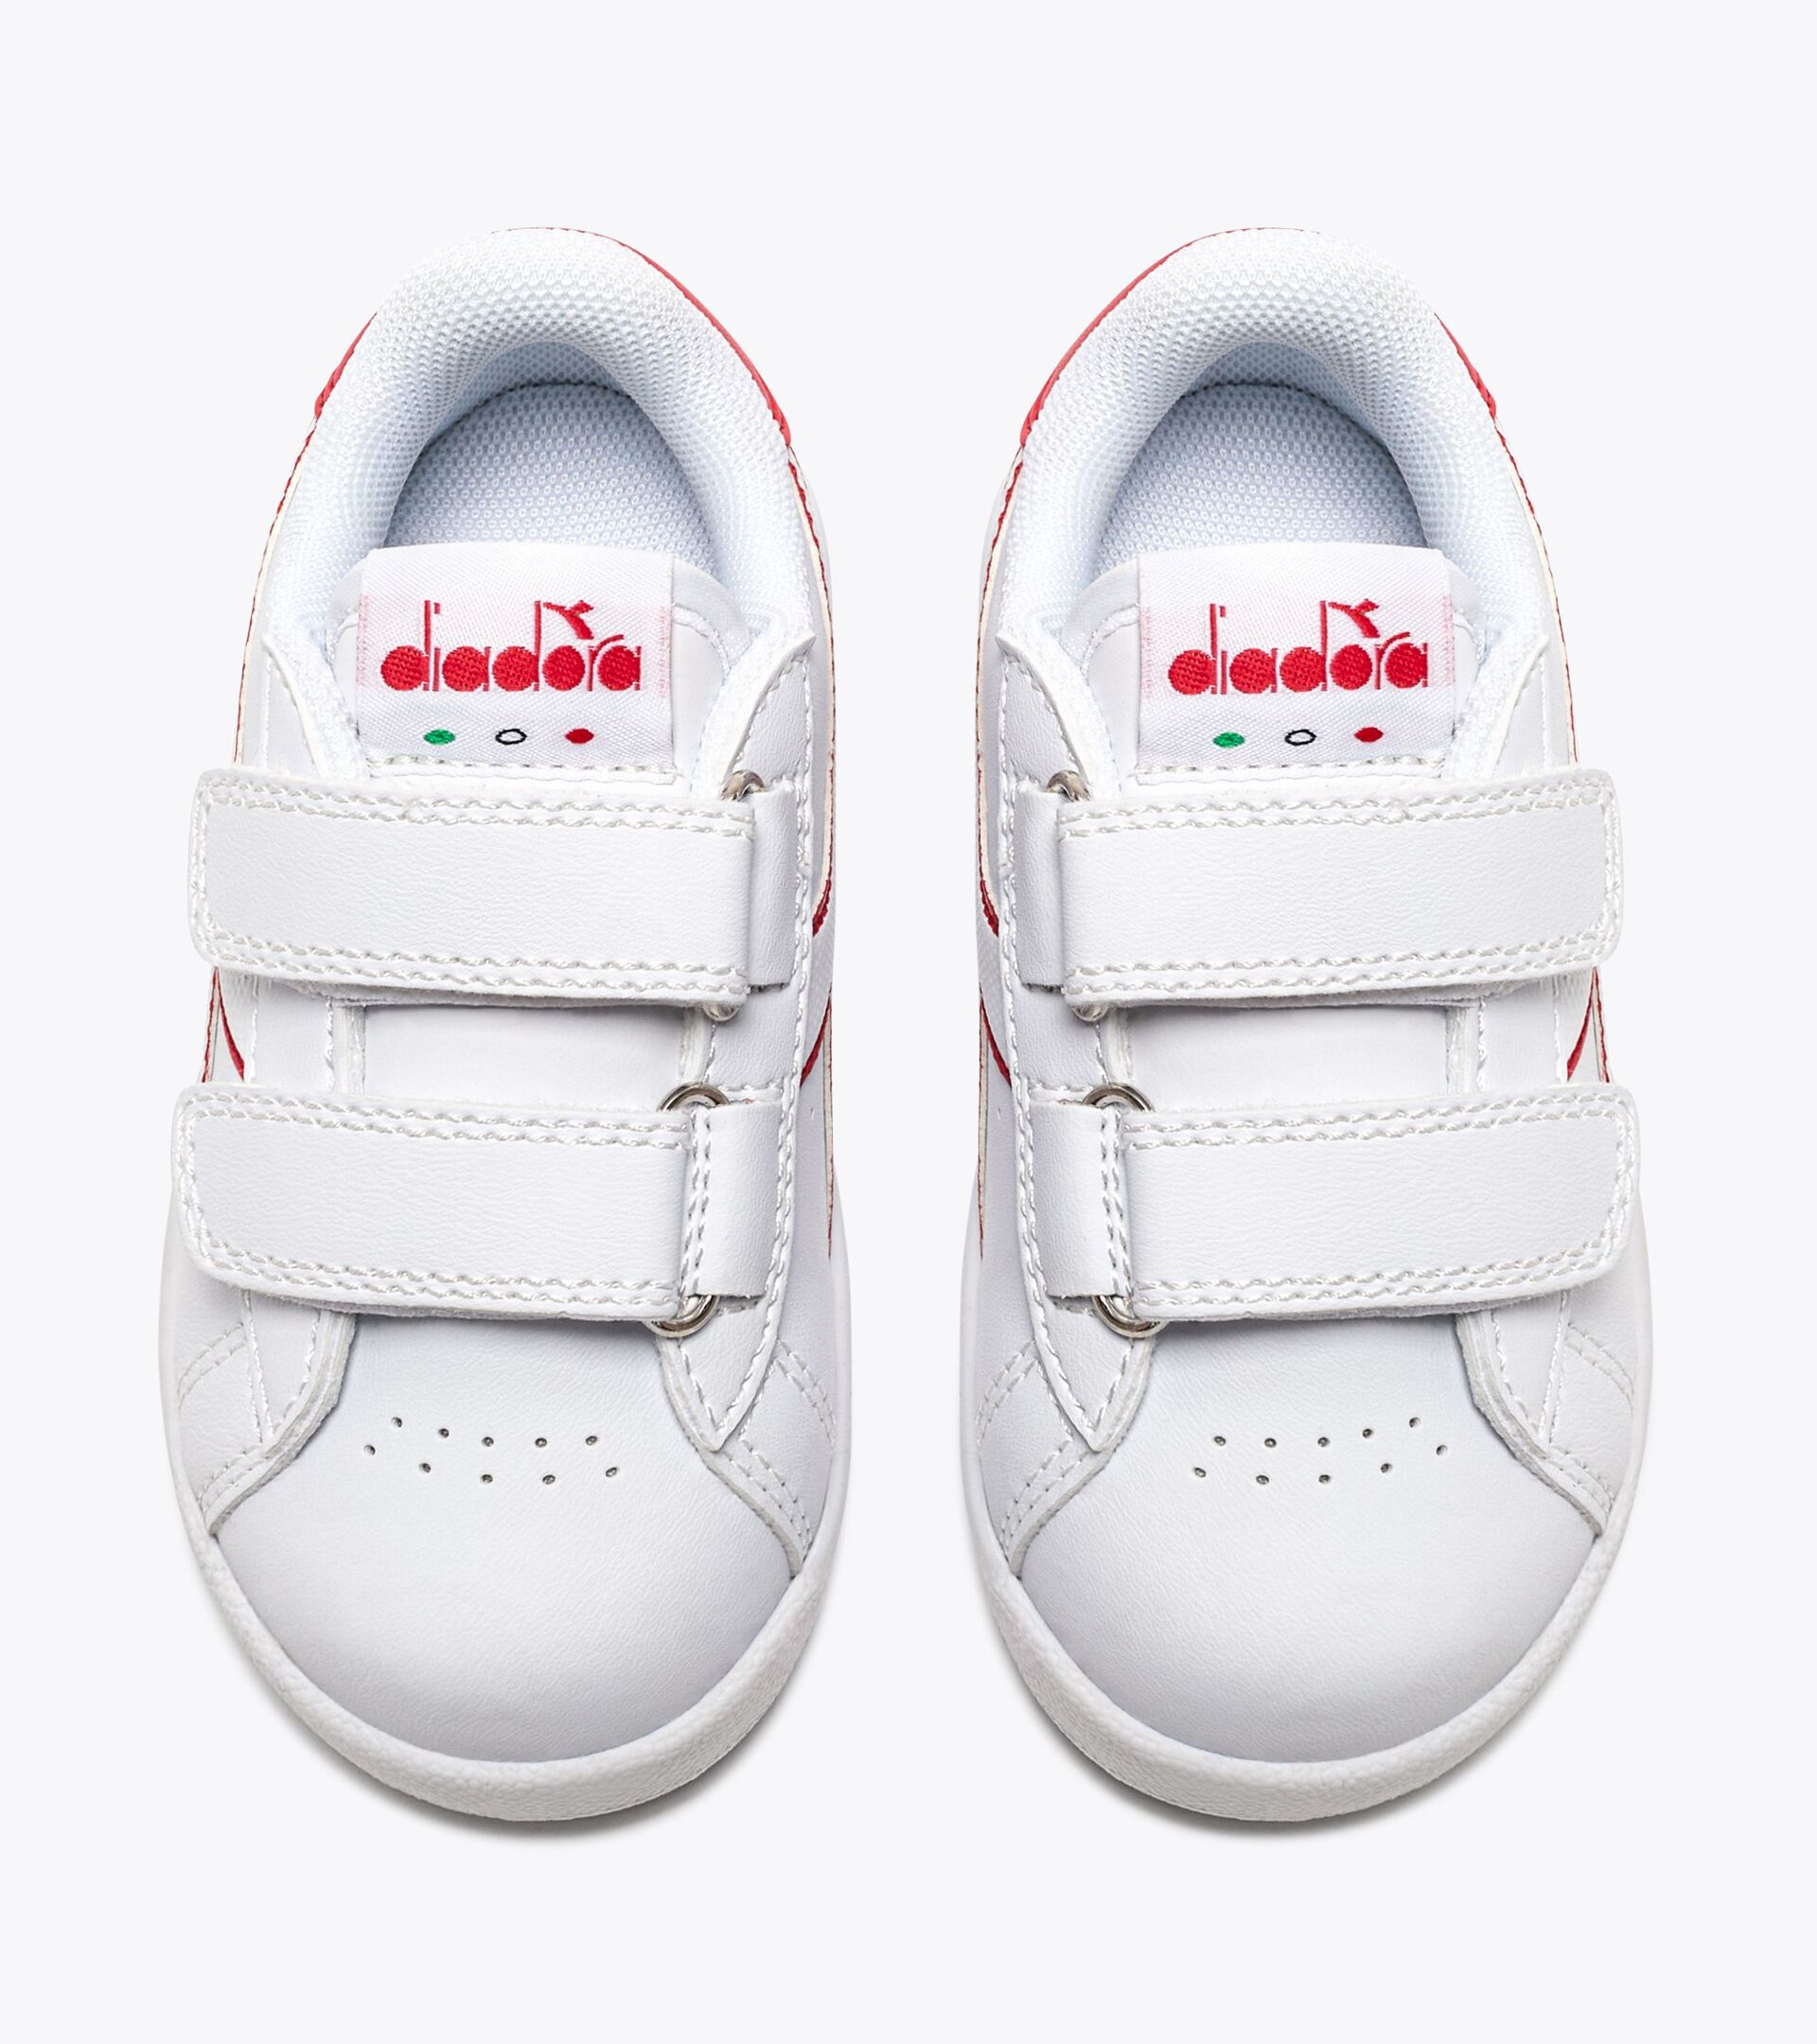 Sports shoes - Toddlers 1-4 years GAME P TD WHITE/BITTERSWEET RED - Diadora